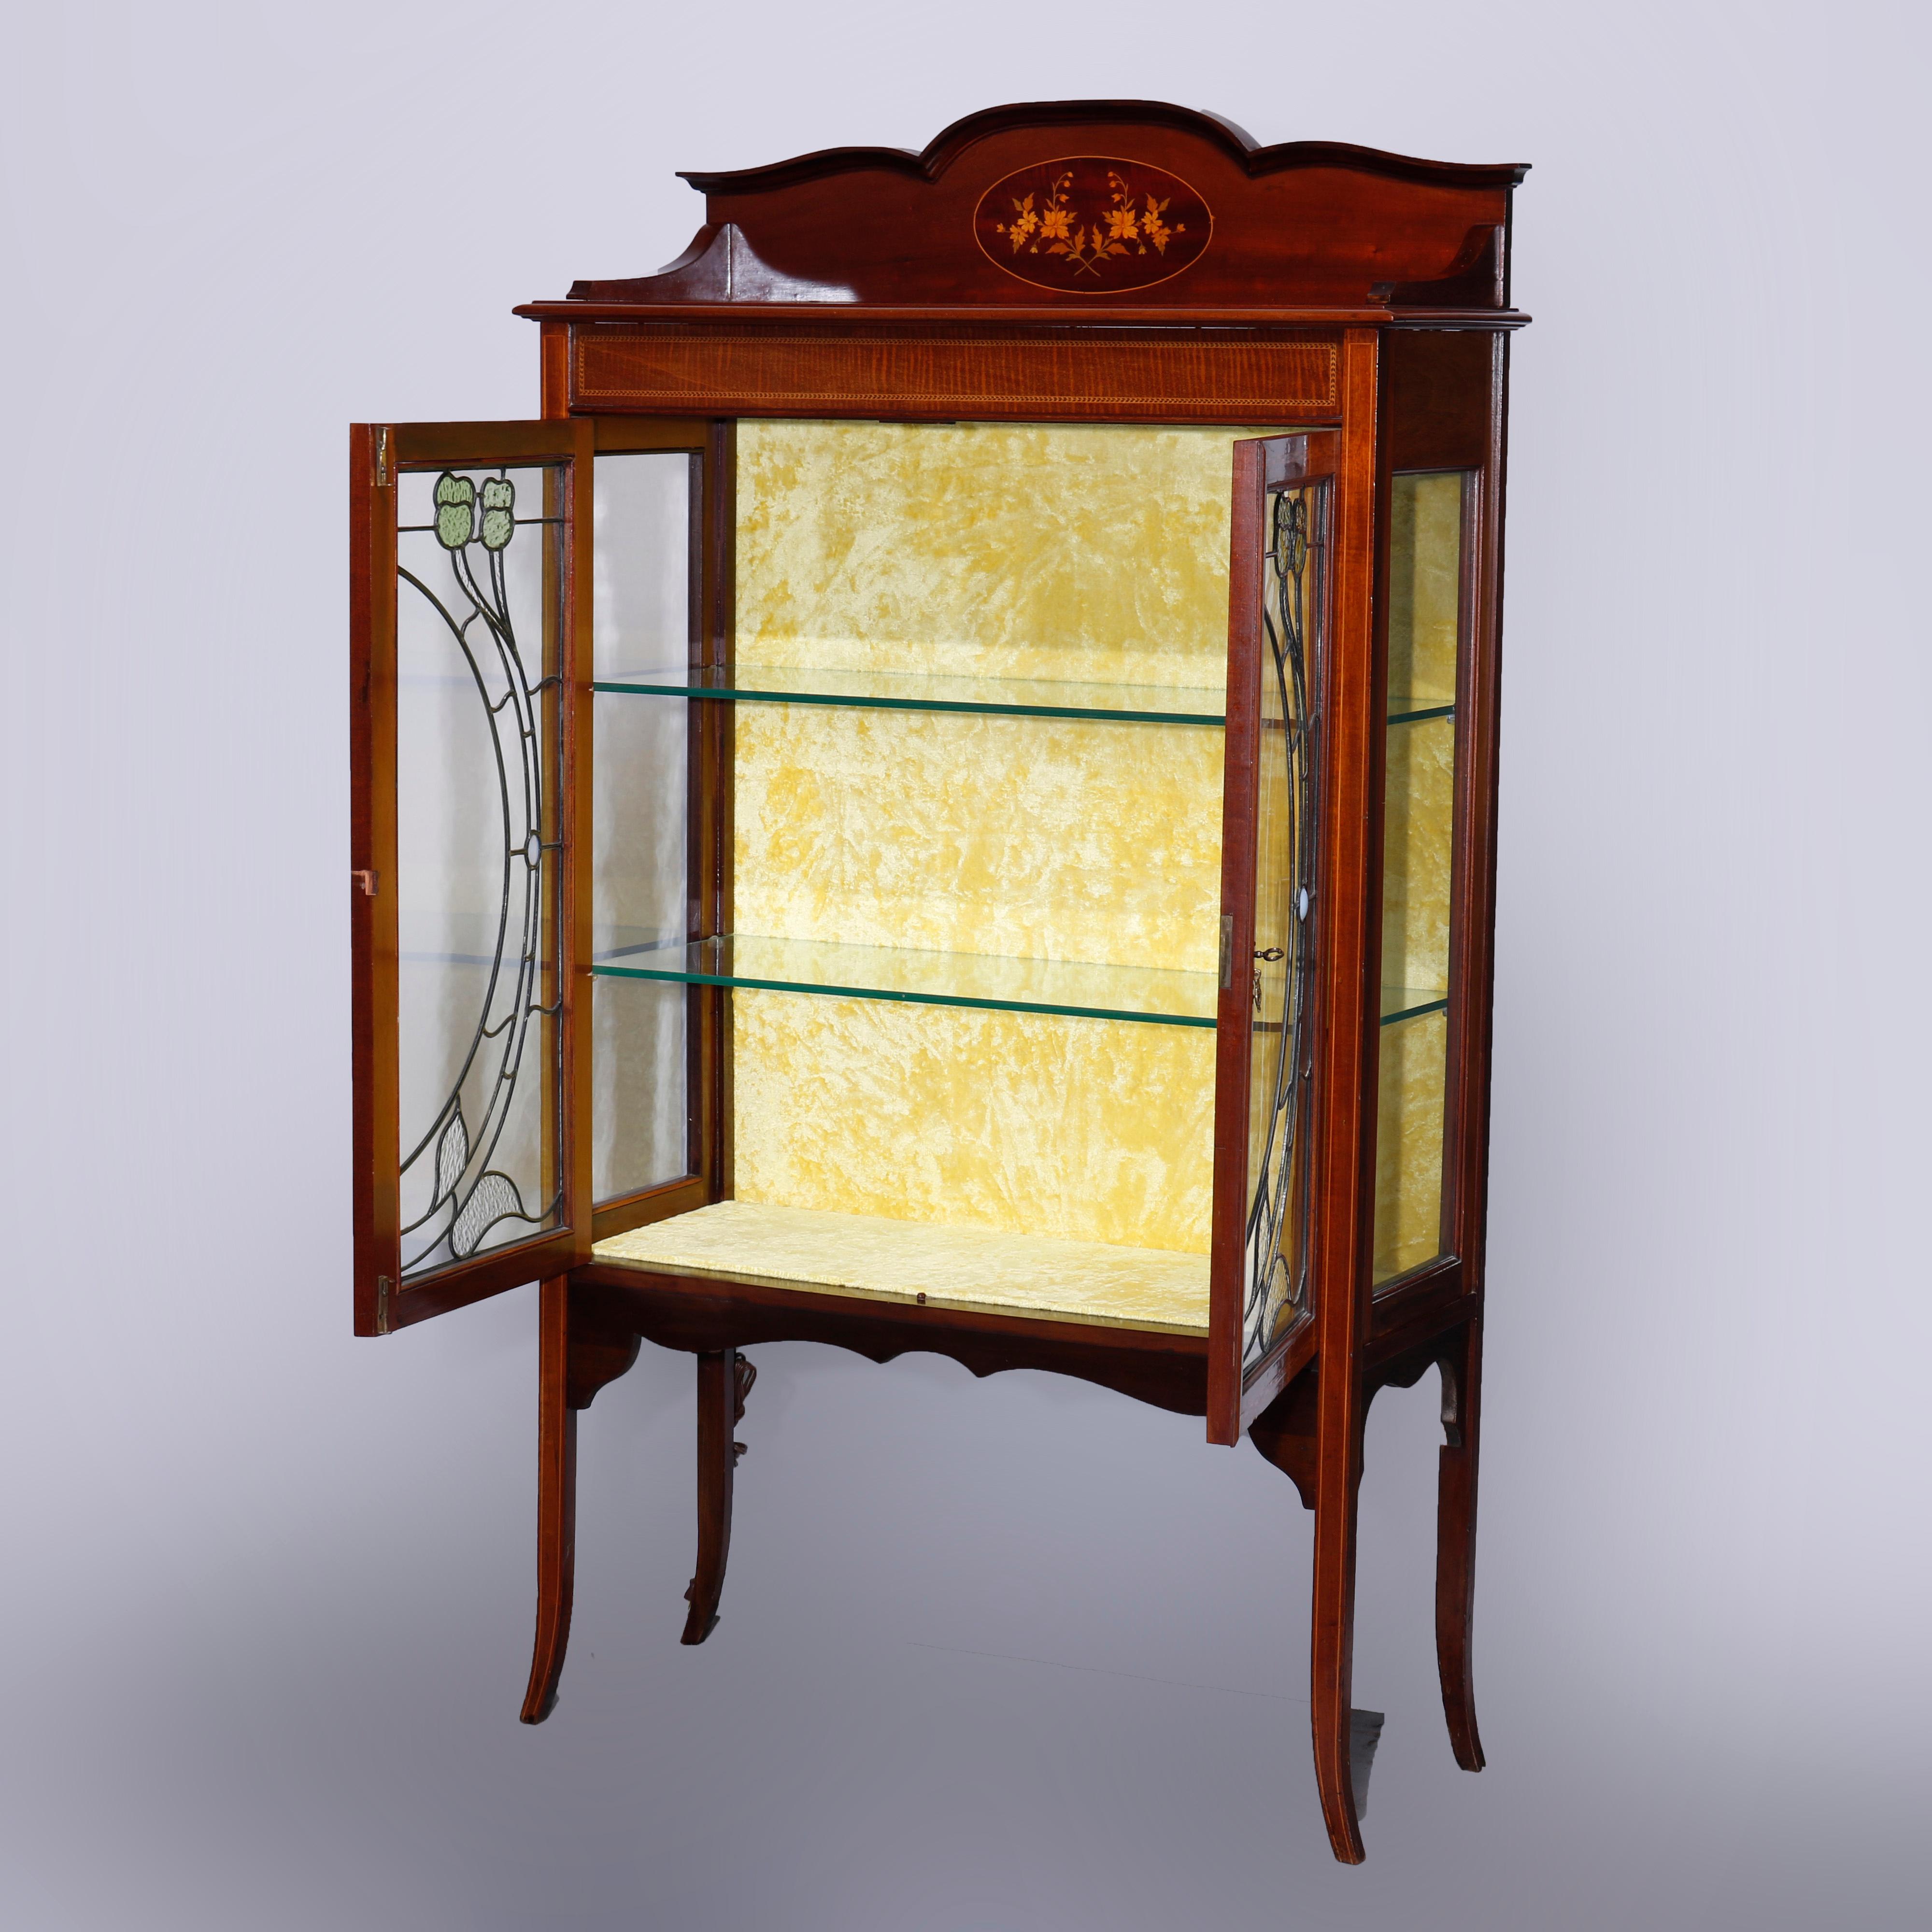 European Antique Art Nouveau Marquetry Inlaid Floral Leaded Glass China Cabinet, c1900